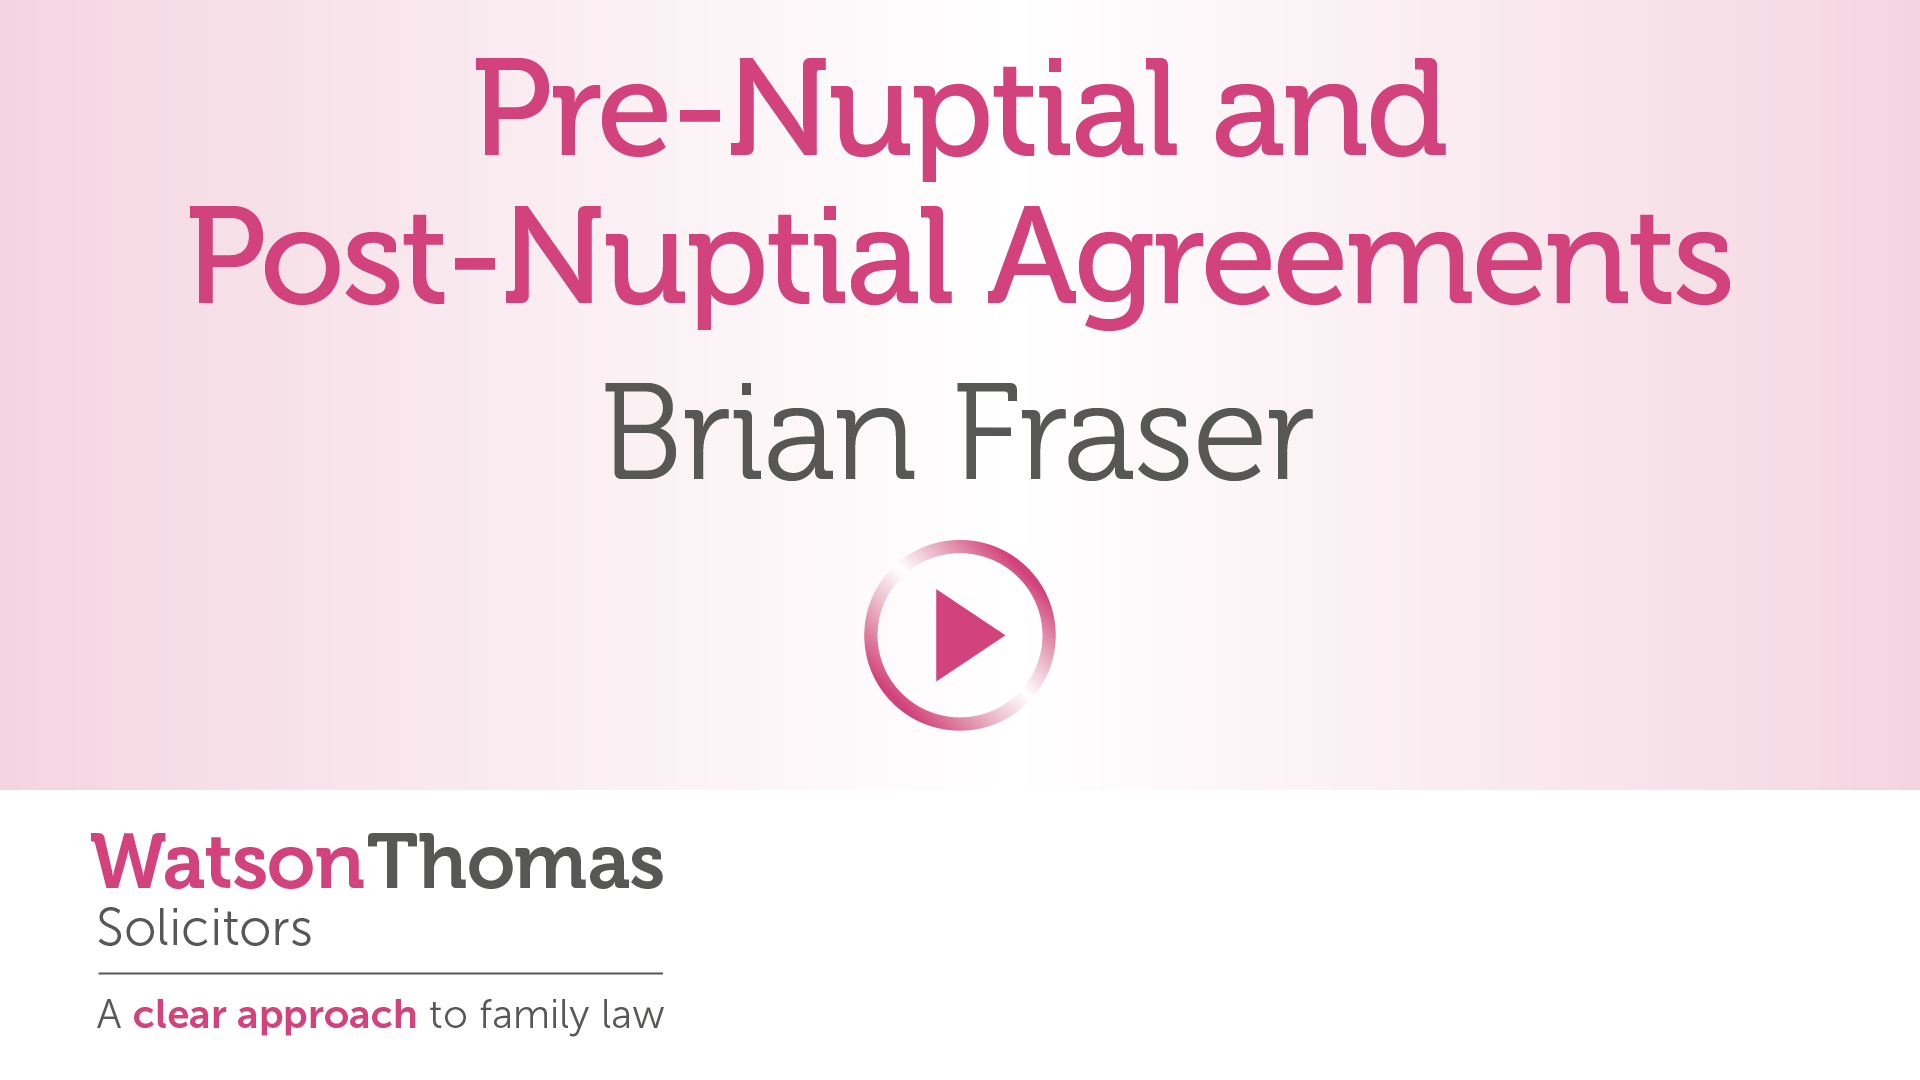 Pre-Nuptial and Post-Nuptial Agreements